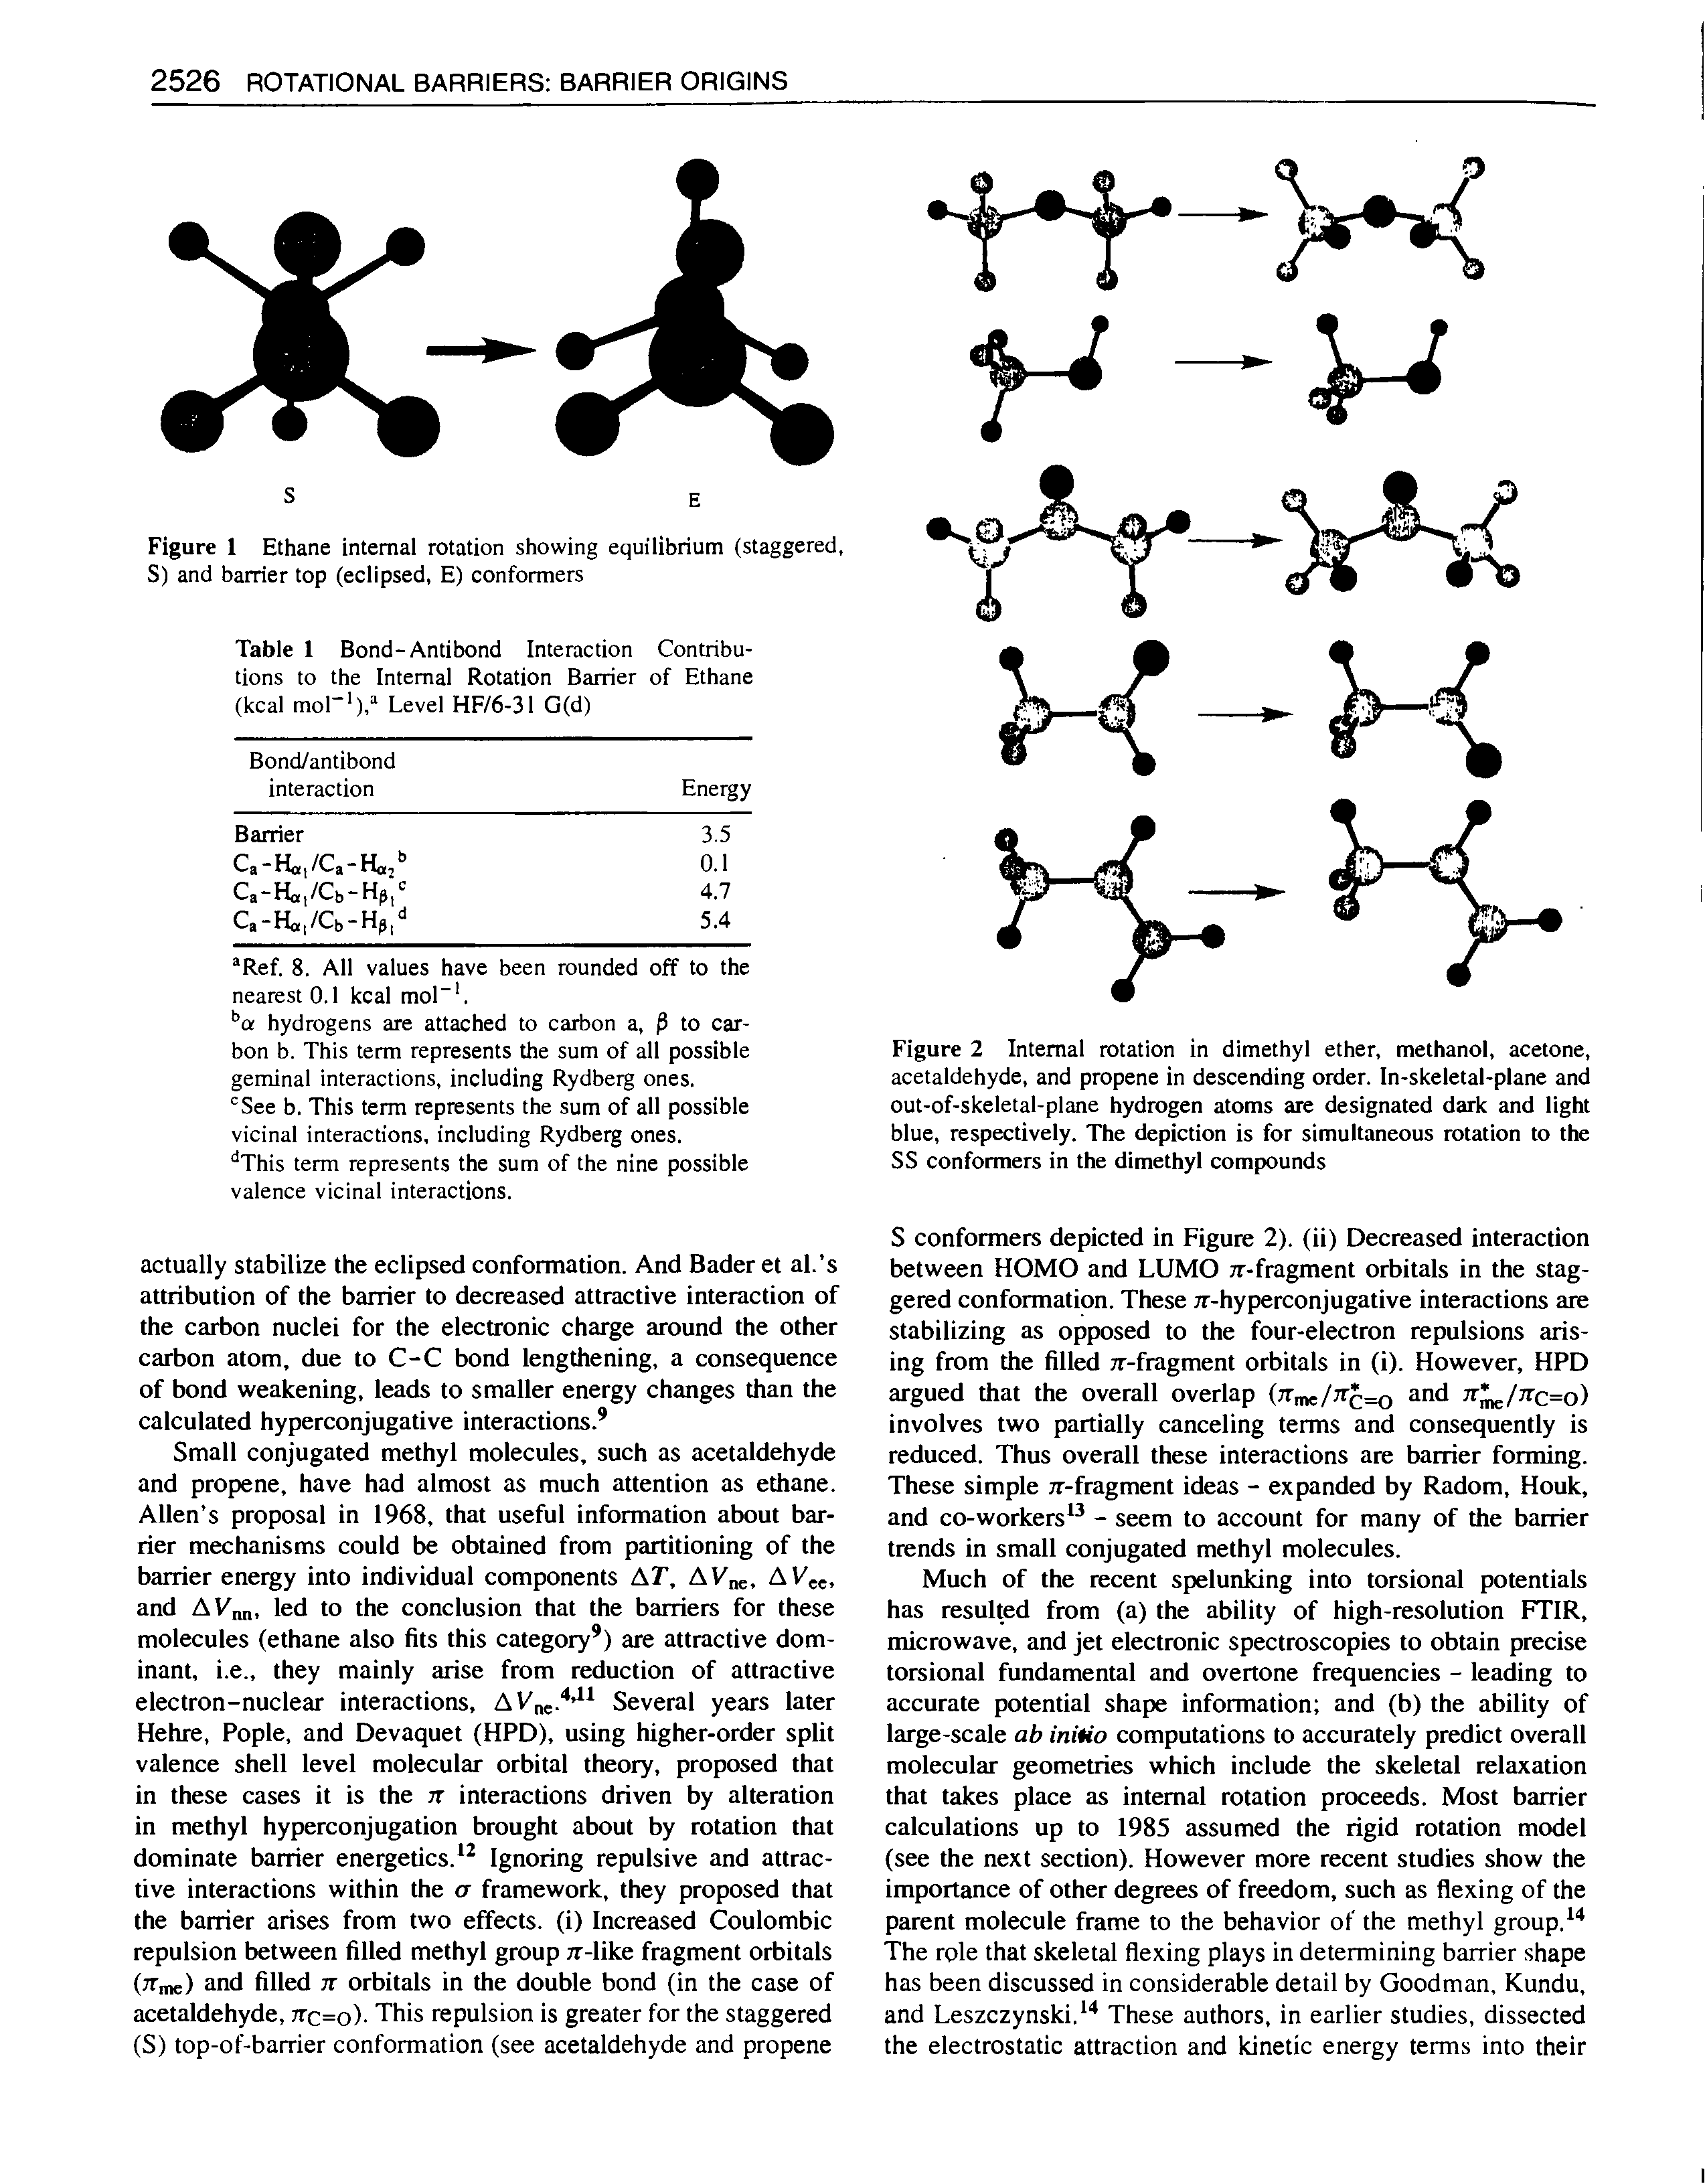 Figure 2 Internal rotation in dimethyl ether, methanol, acetone, acetaldehyde, and propene in descending order. In- keletal-plane and out-of-skeletal-plane hydrogen atoms are designated dark and light biue, respectively. The depiction is for simultaneous rotation to the SS conformers in the dimethyl compounds...